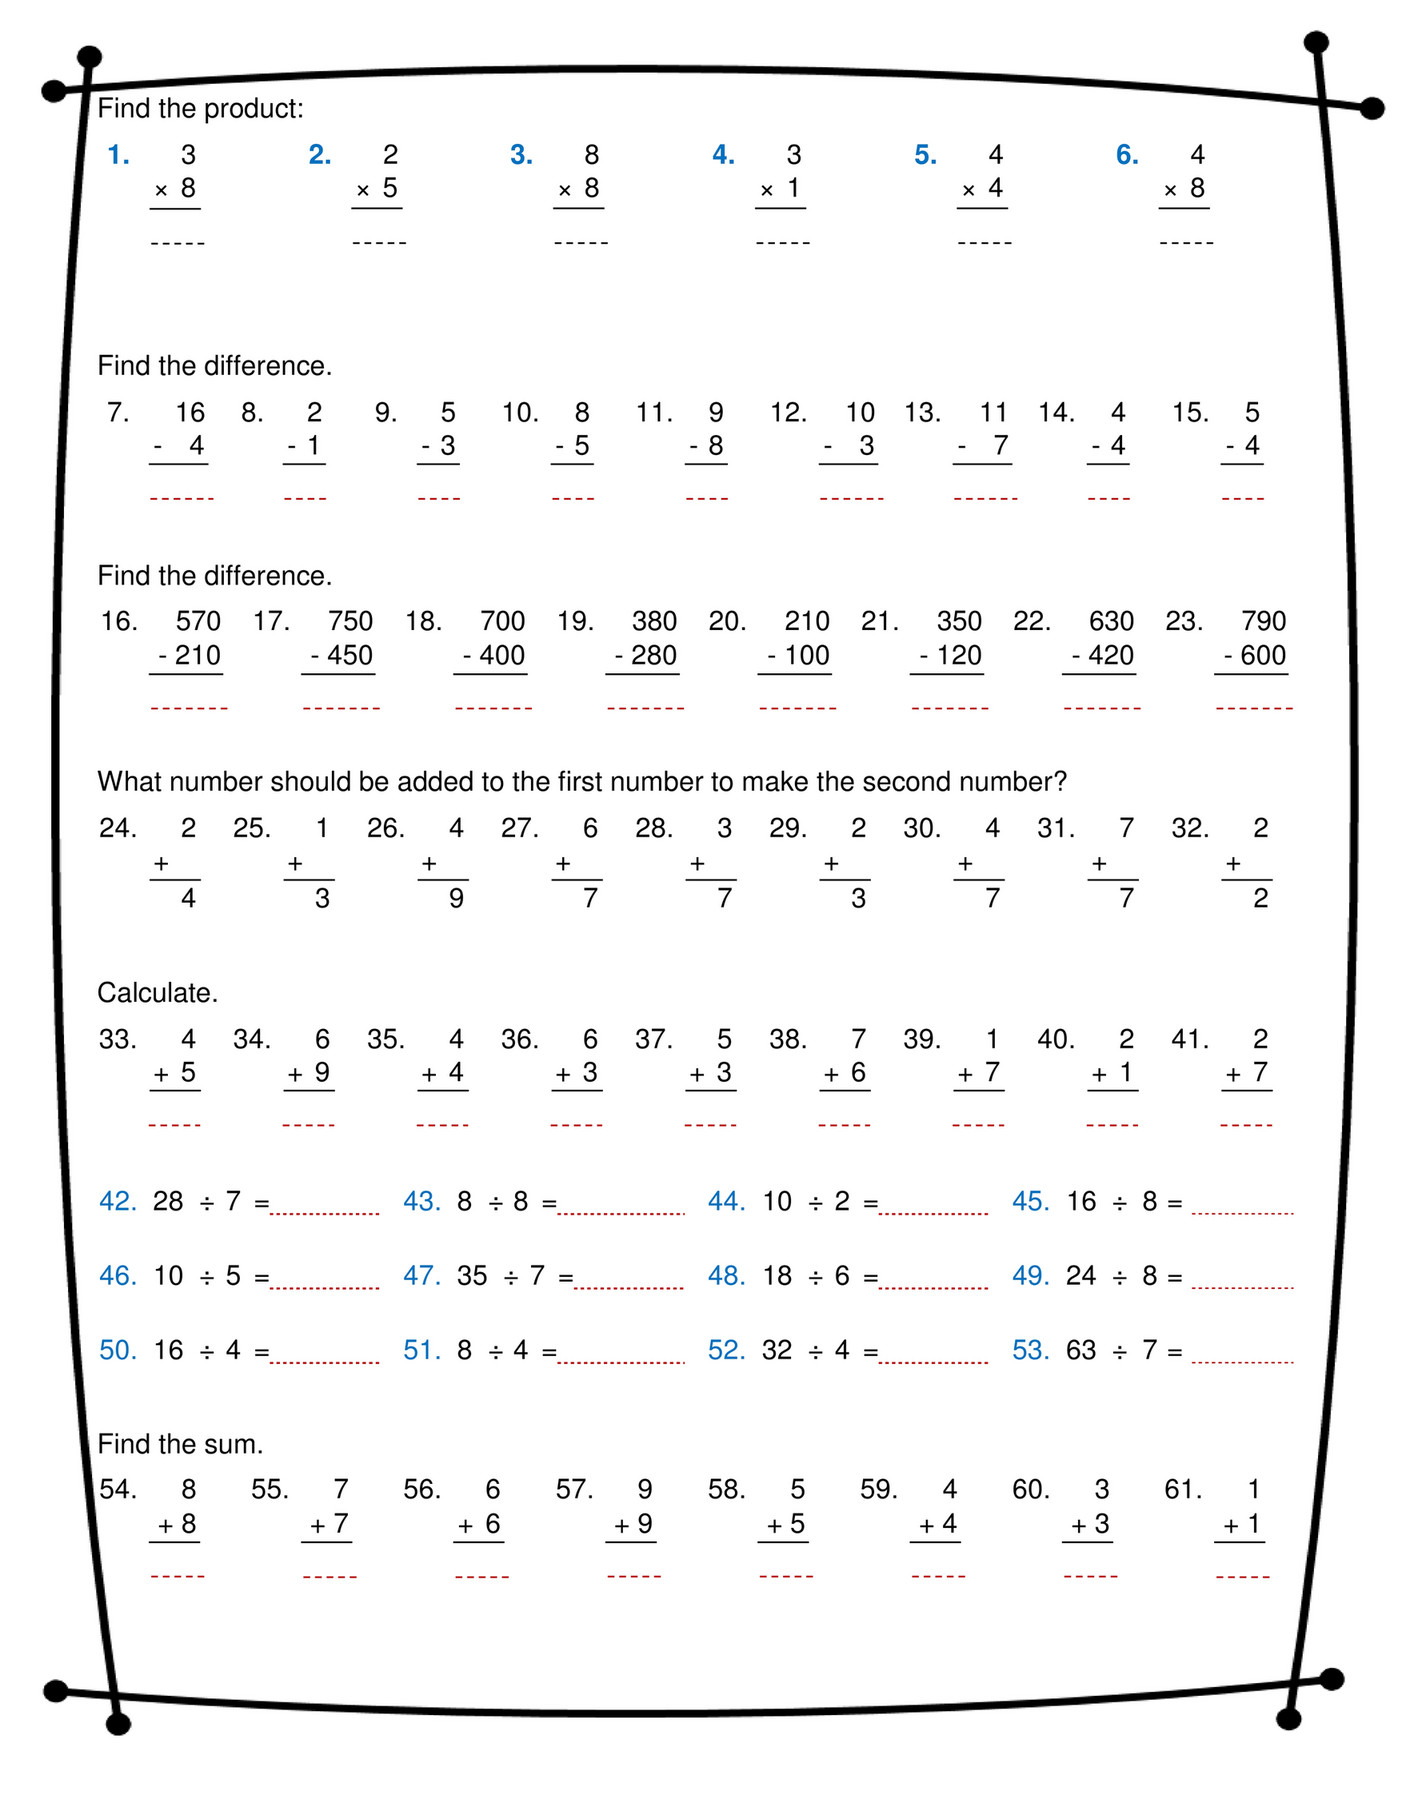 division-with-remainders-worksheets-division-worksheets-free-printable-math-pdfs-edhelpercom